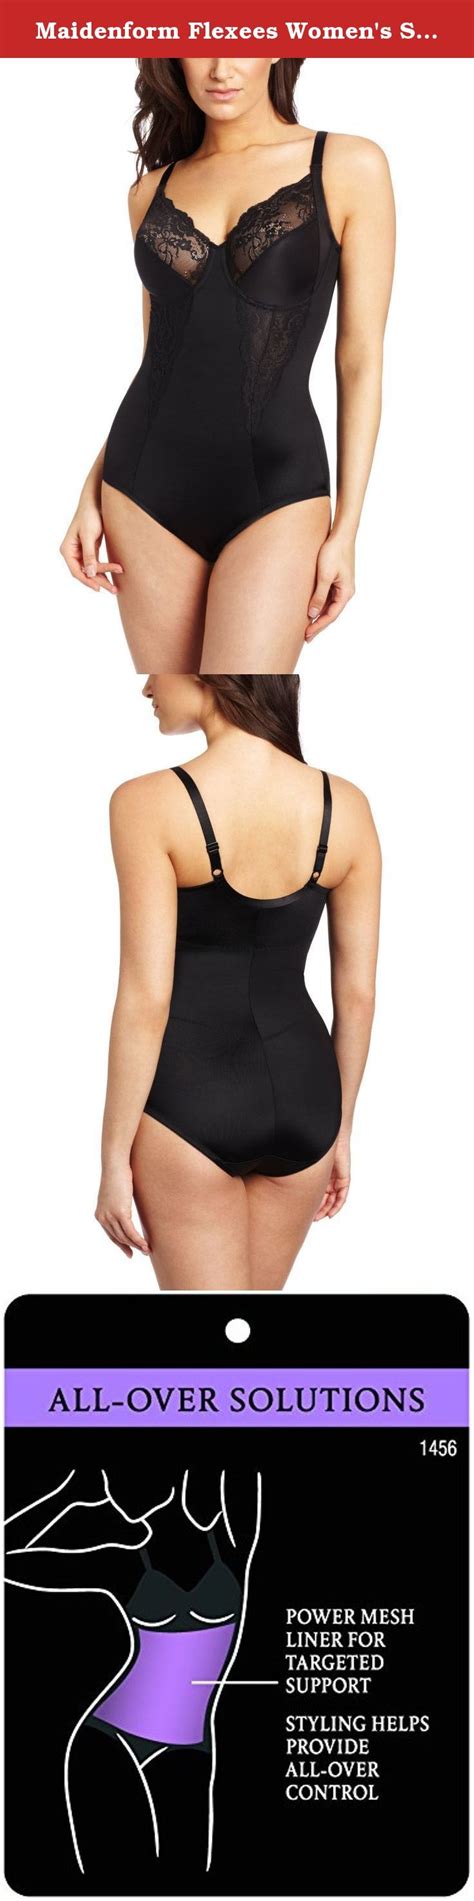 maidenform flexees women s shapewear body briefer with lace we are expanding on our pretty